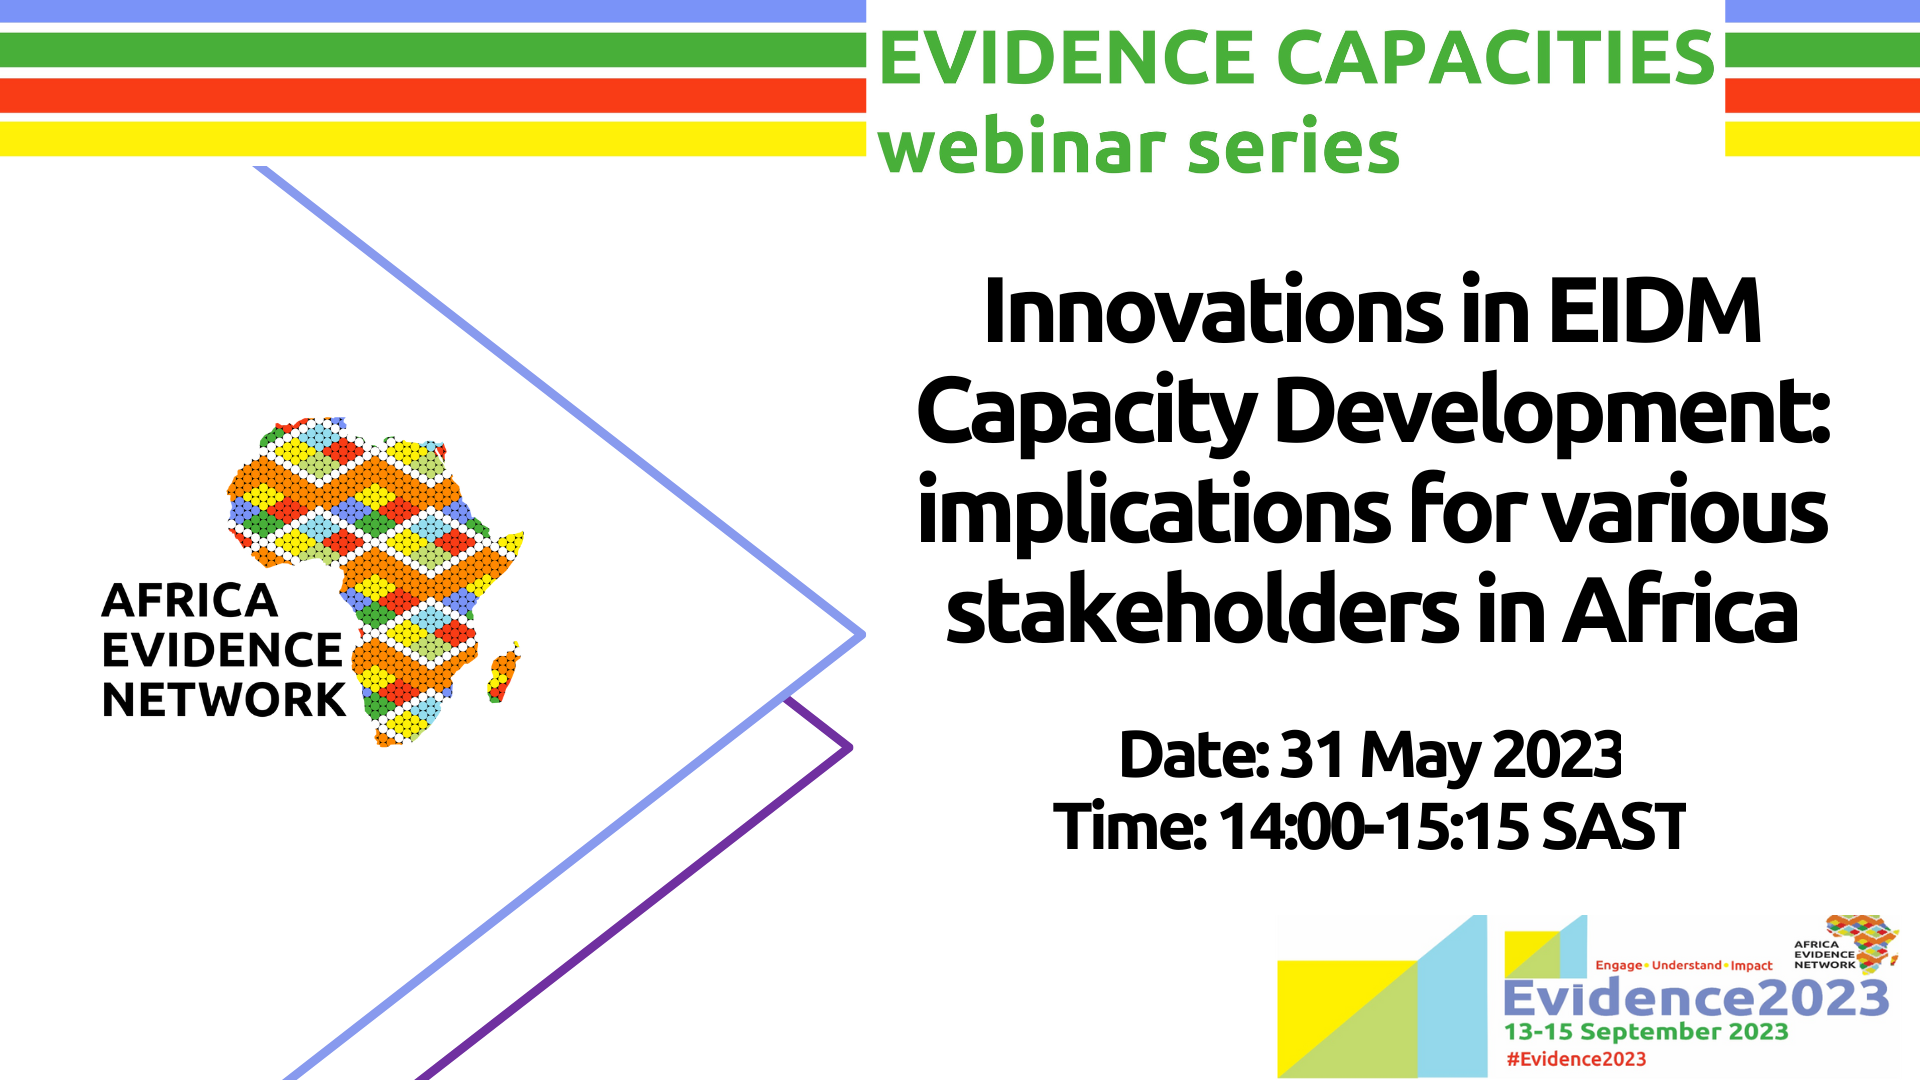 EVENT UPDATE | Innovations in EIDM Capacity Development: Implications for various stakeholders in Africa